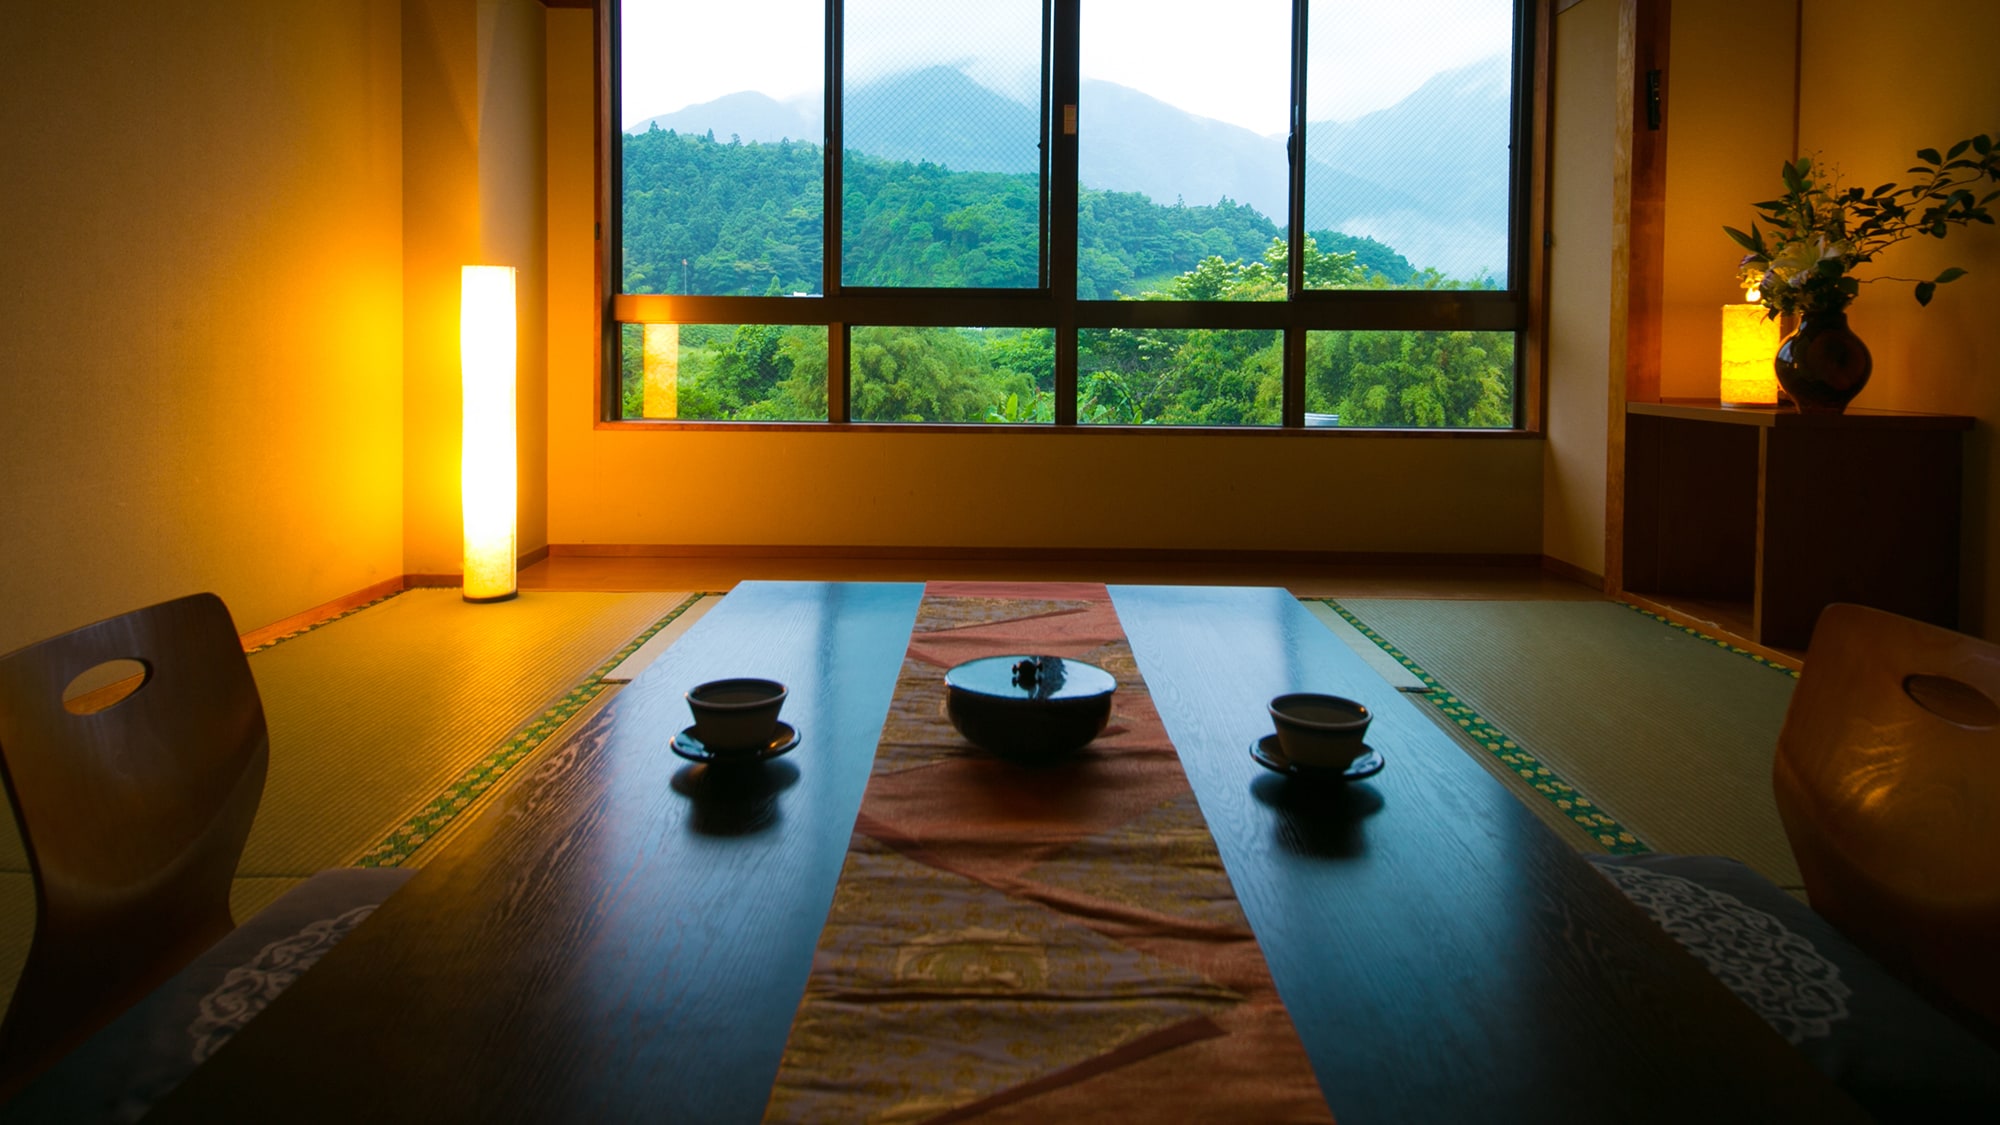  ★ Japanese-style room on the mountain side ≪10 tatami mats≫ ★